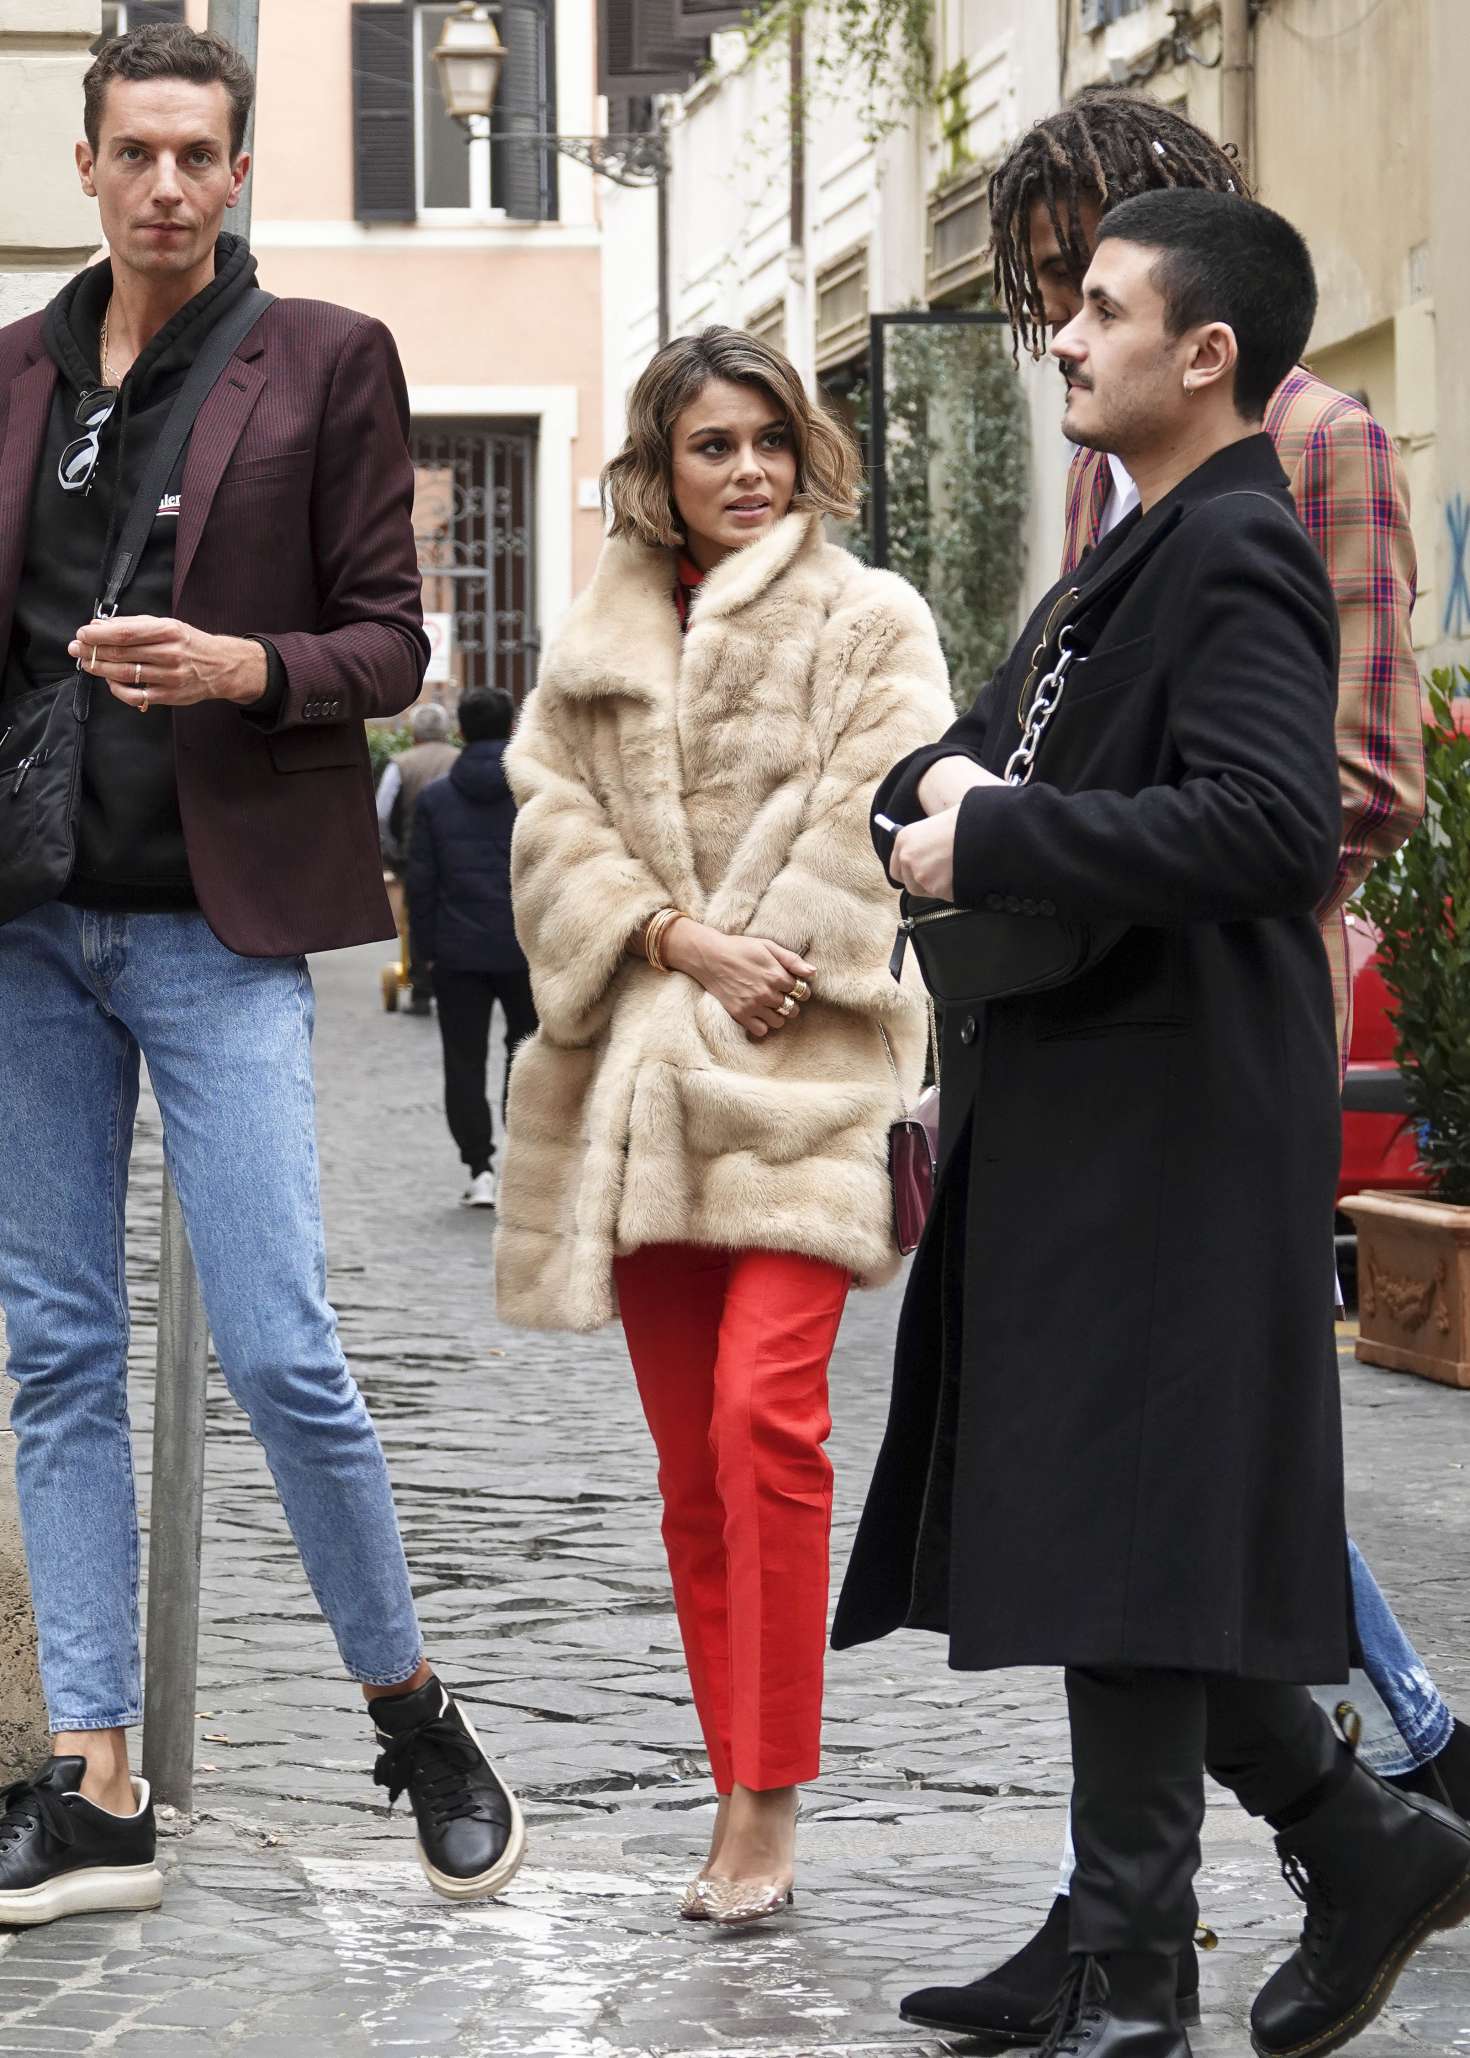 Nathalie Kelley in Fur Coat â€“ Out and about in Rome